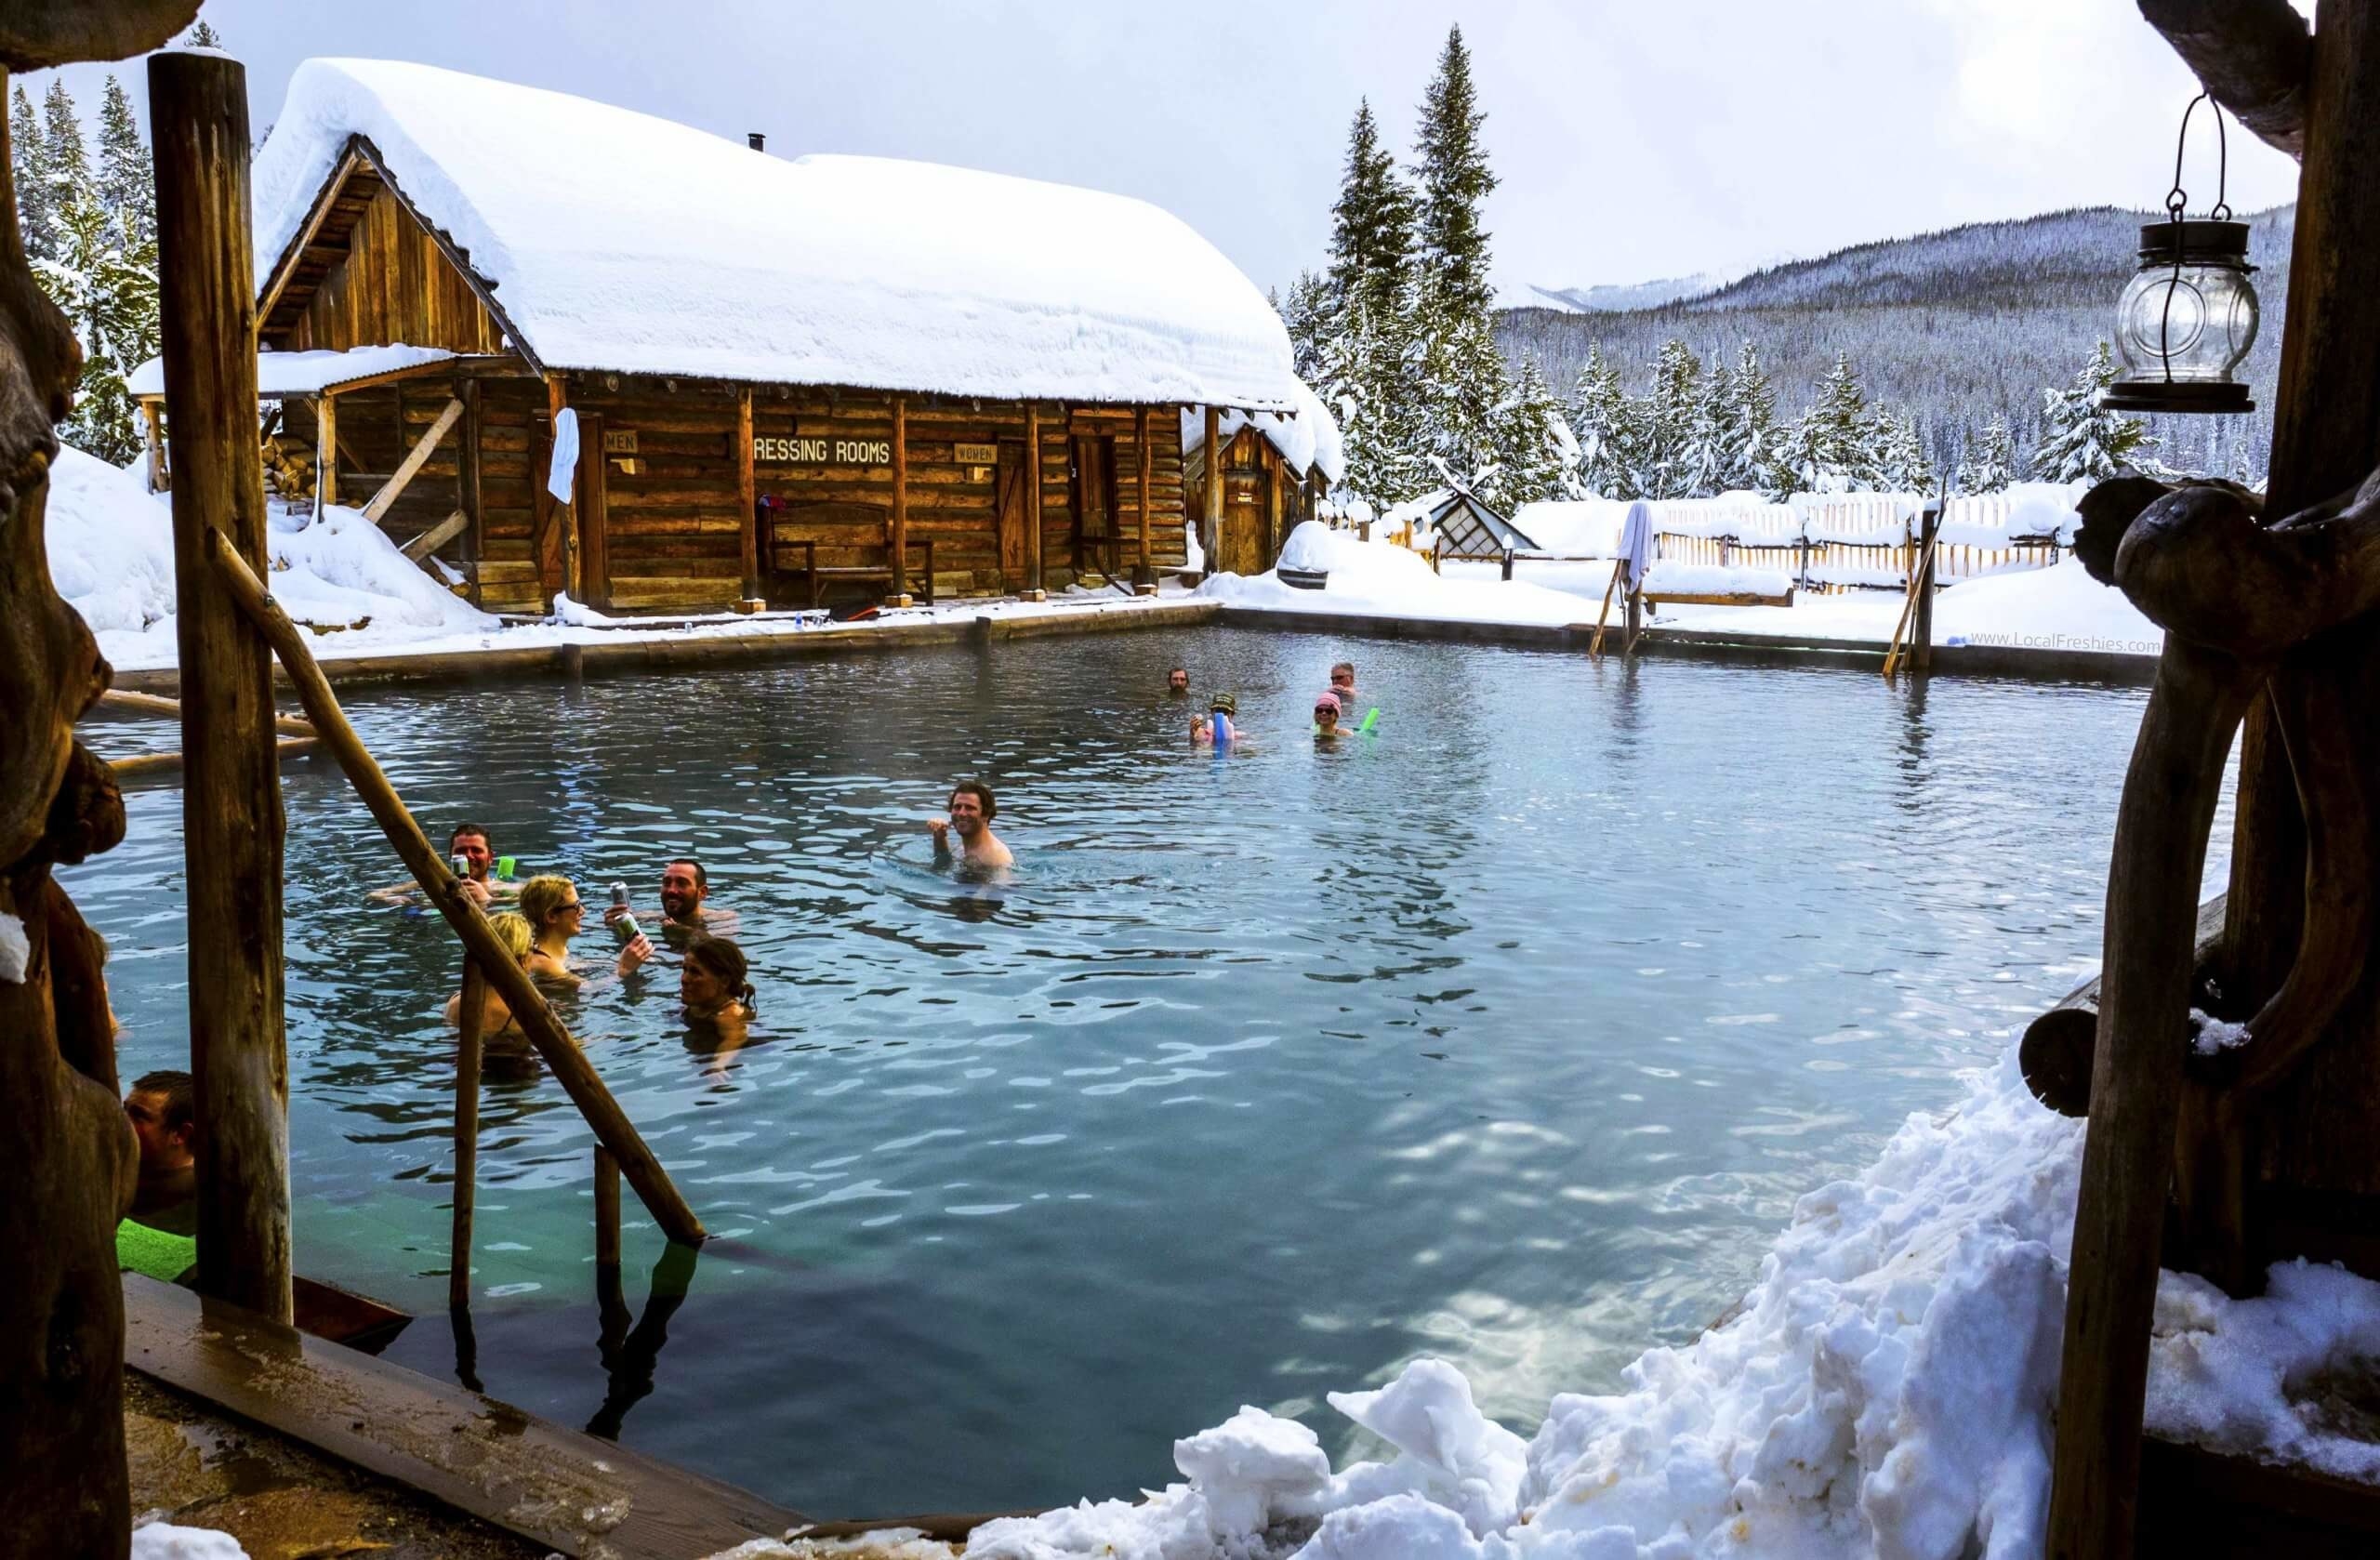 Hot springs during winter.